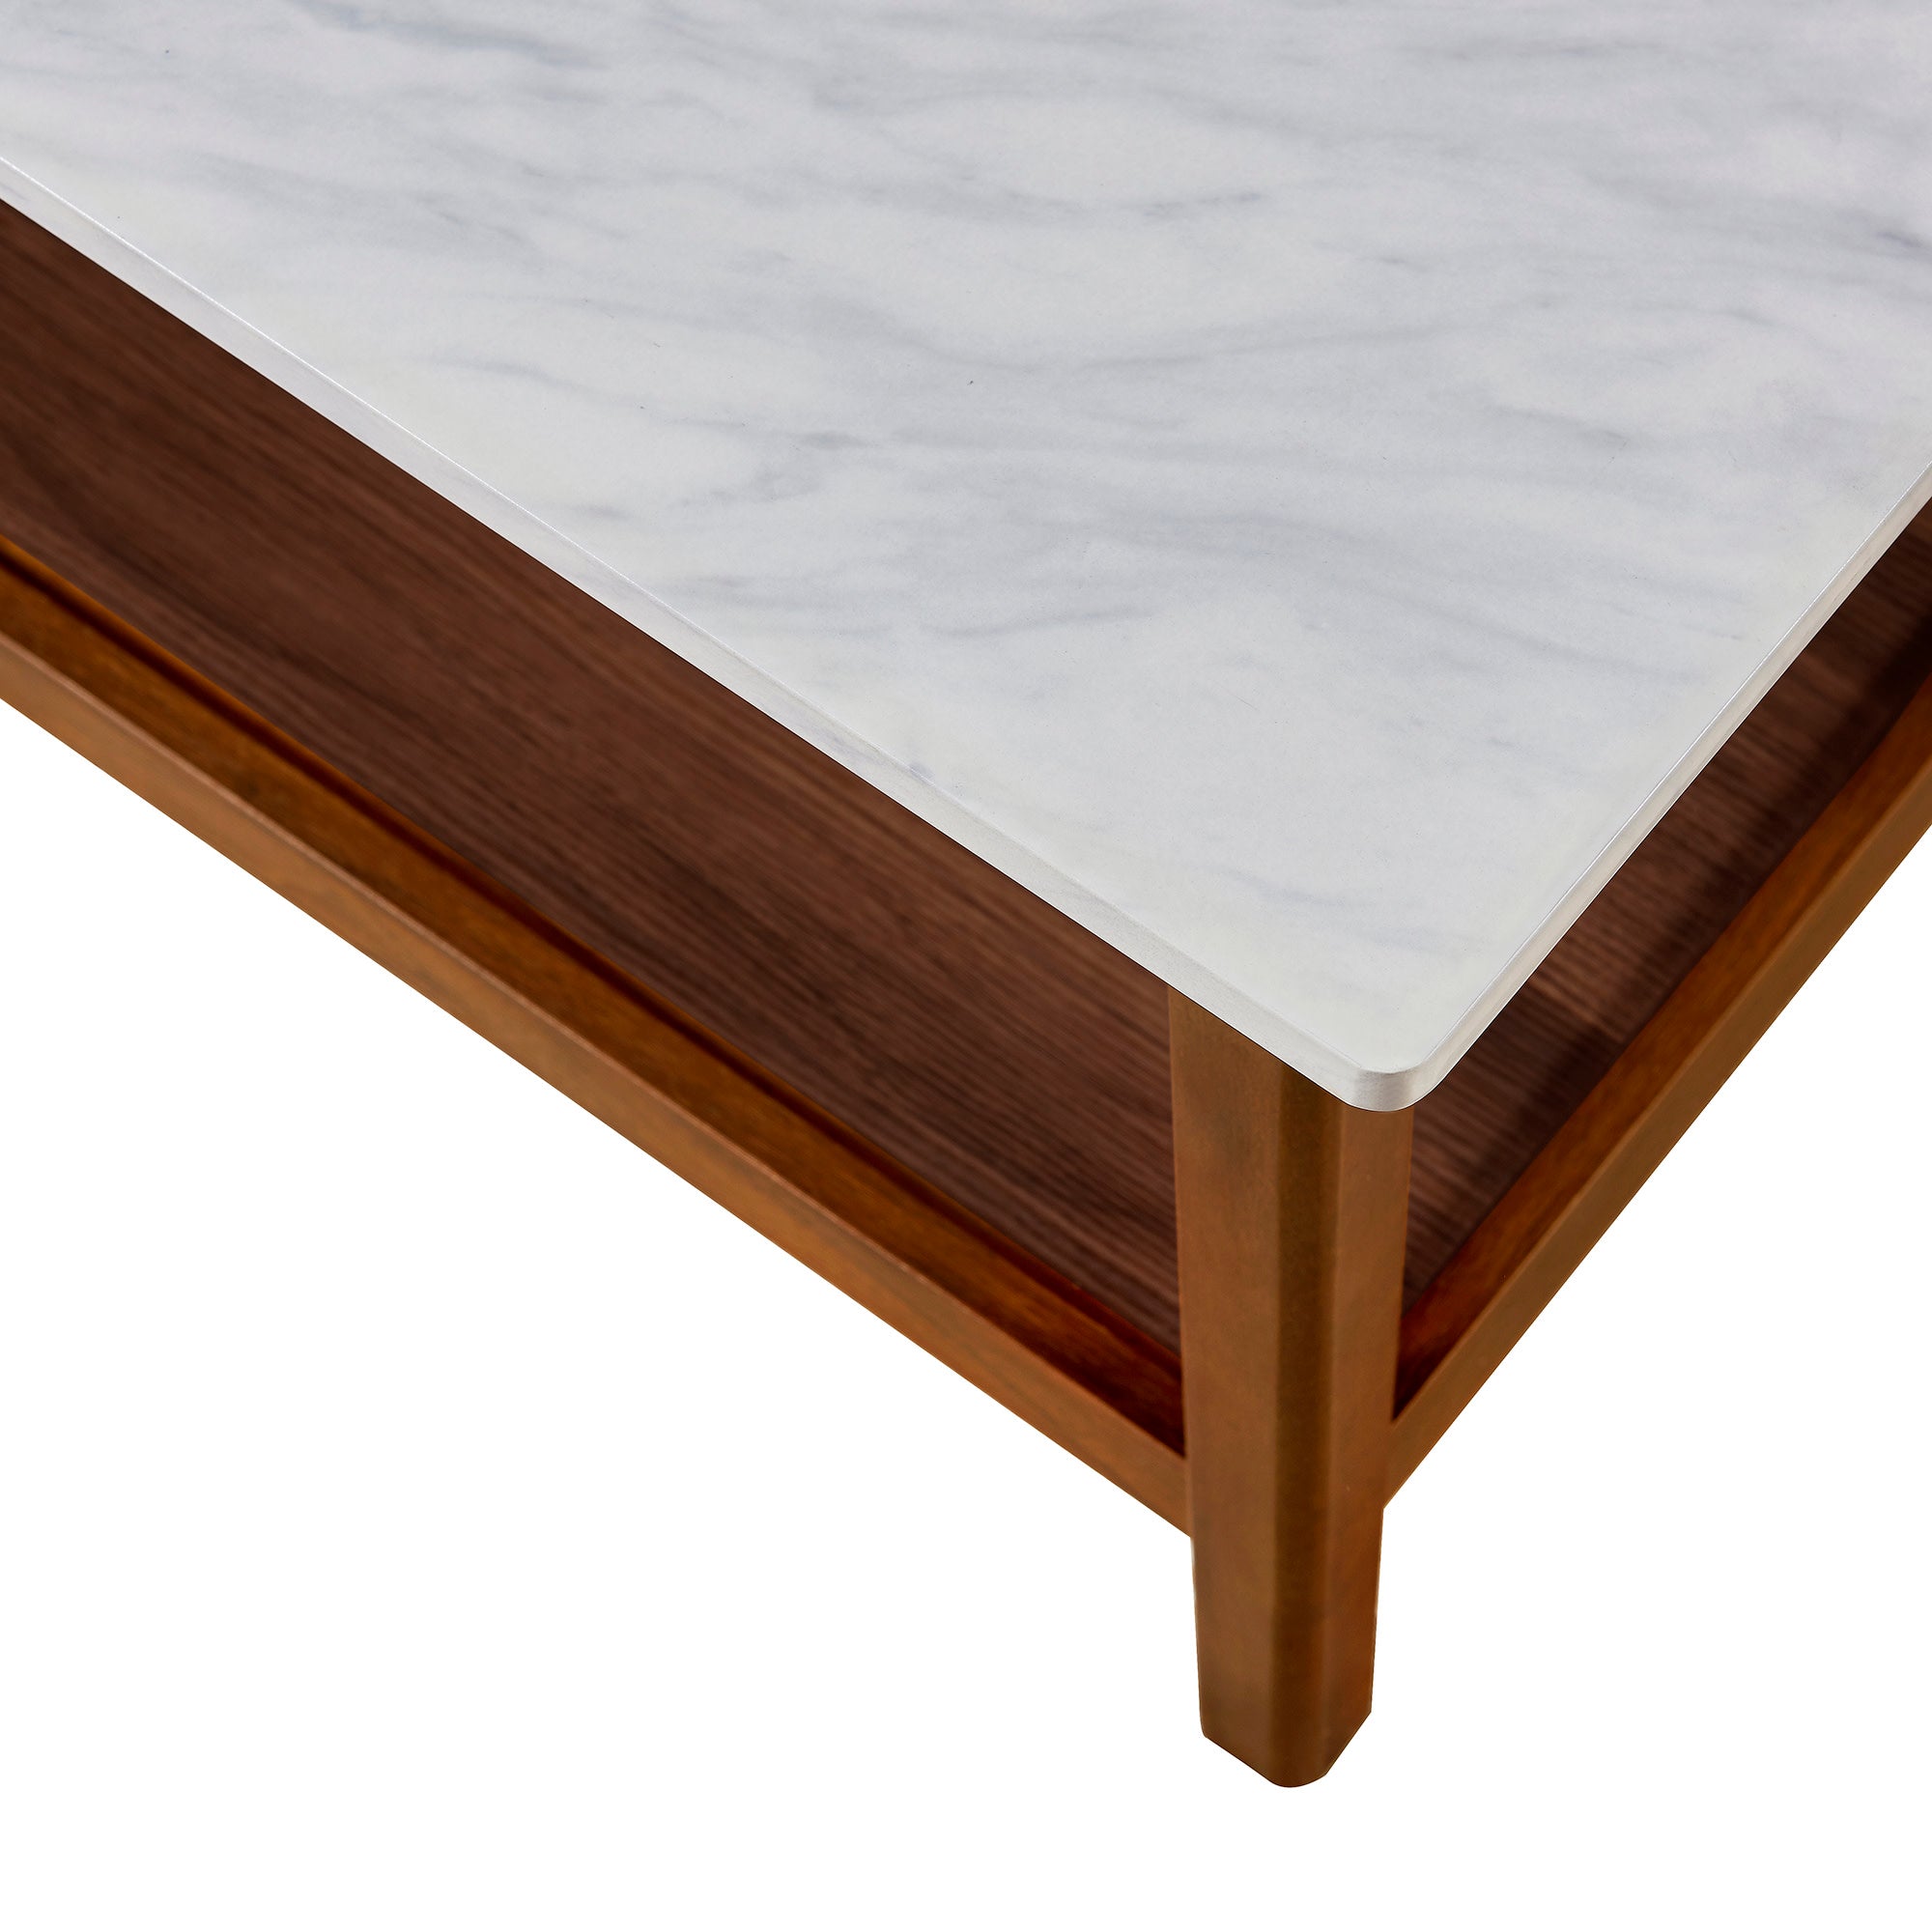 Teamson Home Kingston Wooden Coffee Table with Storage and Marble-Look Top, Marble/Walnut